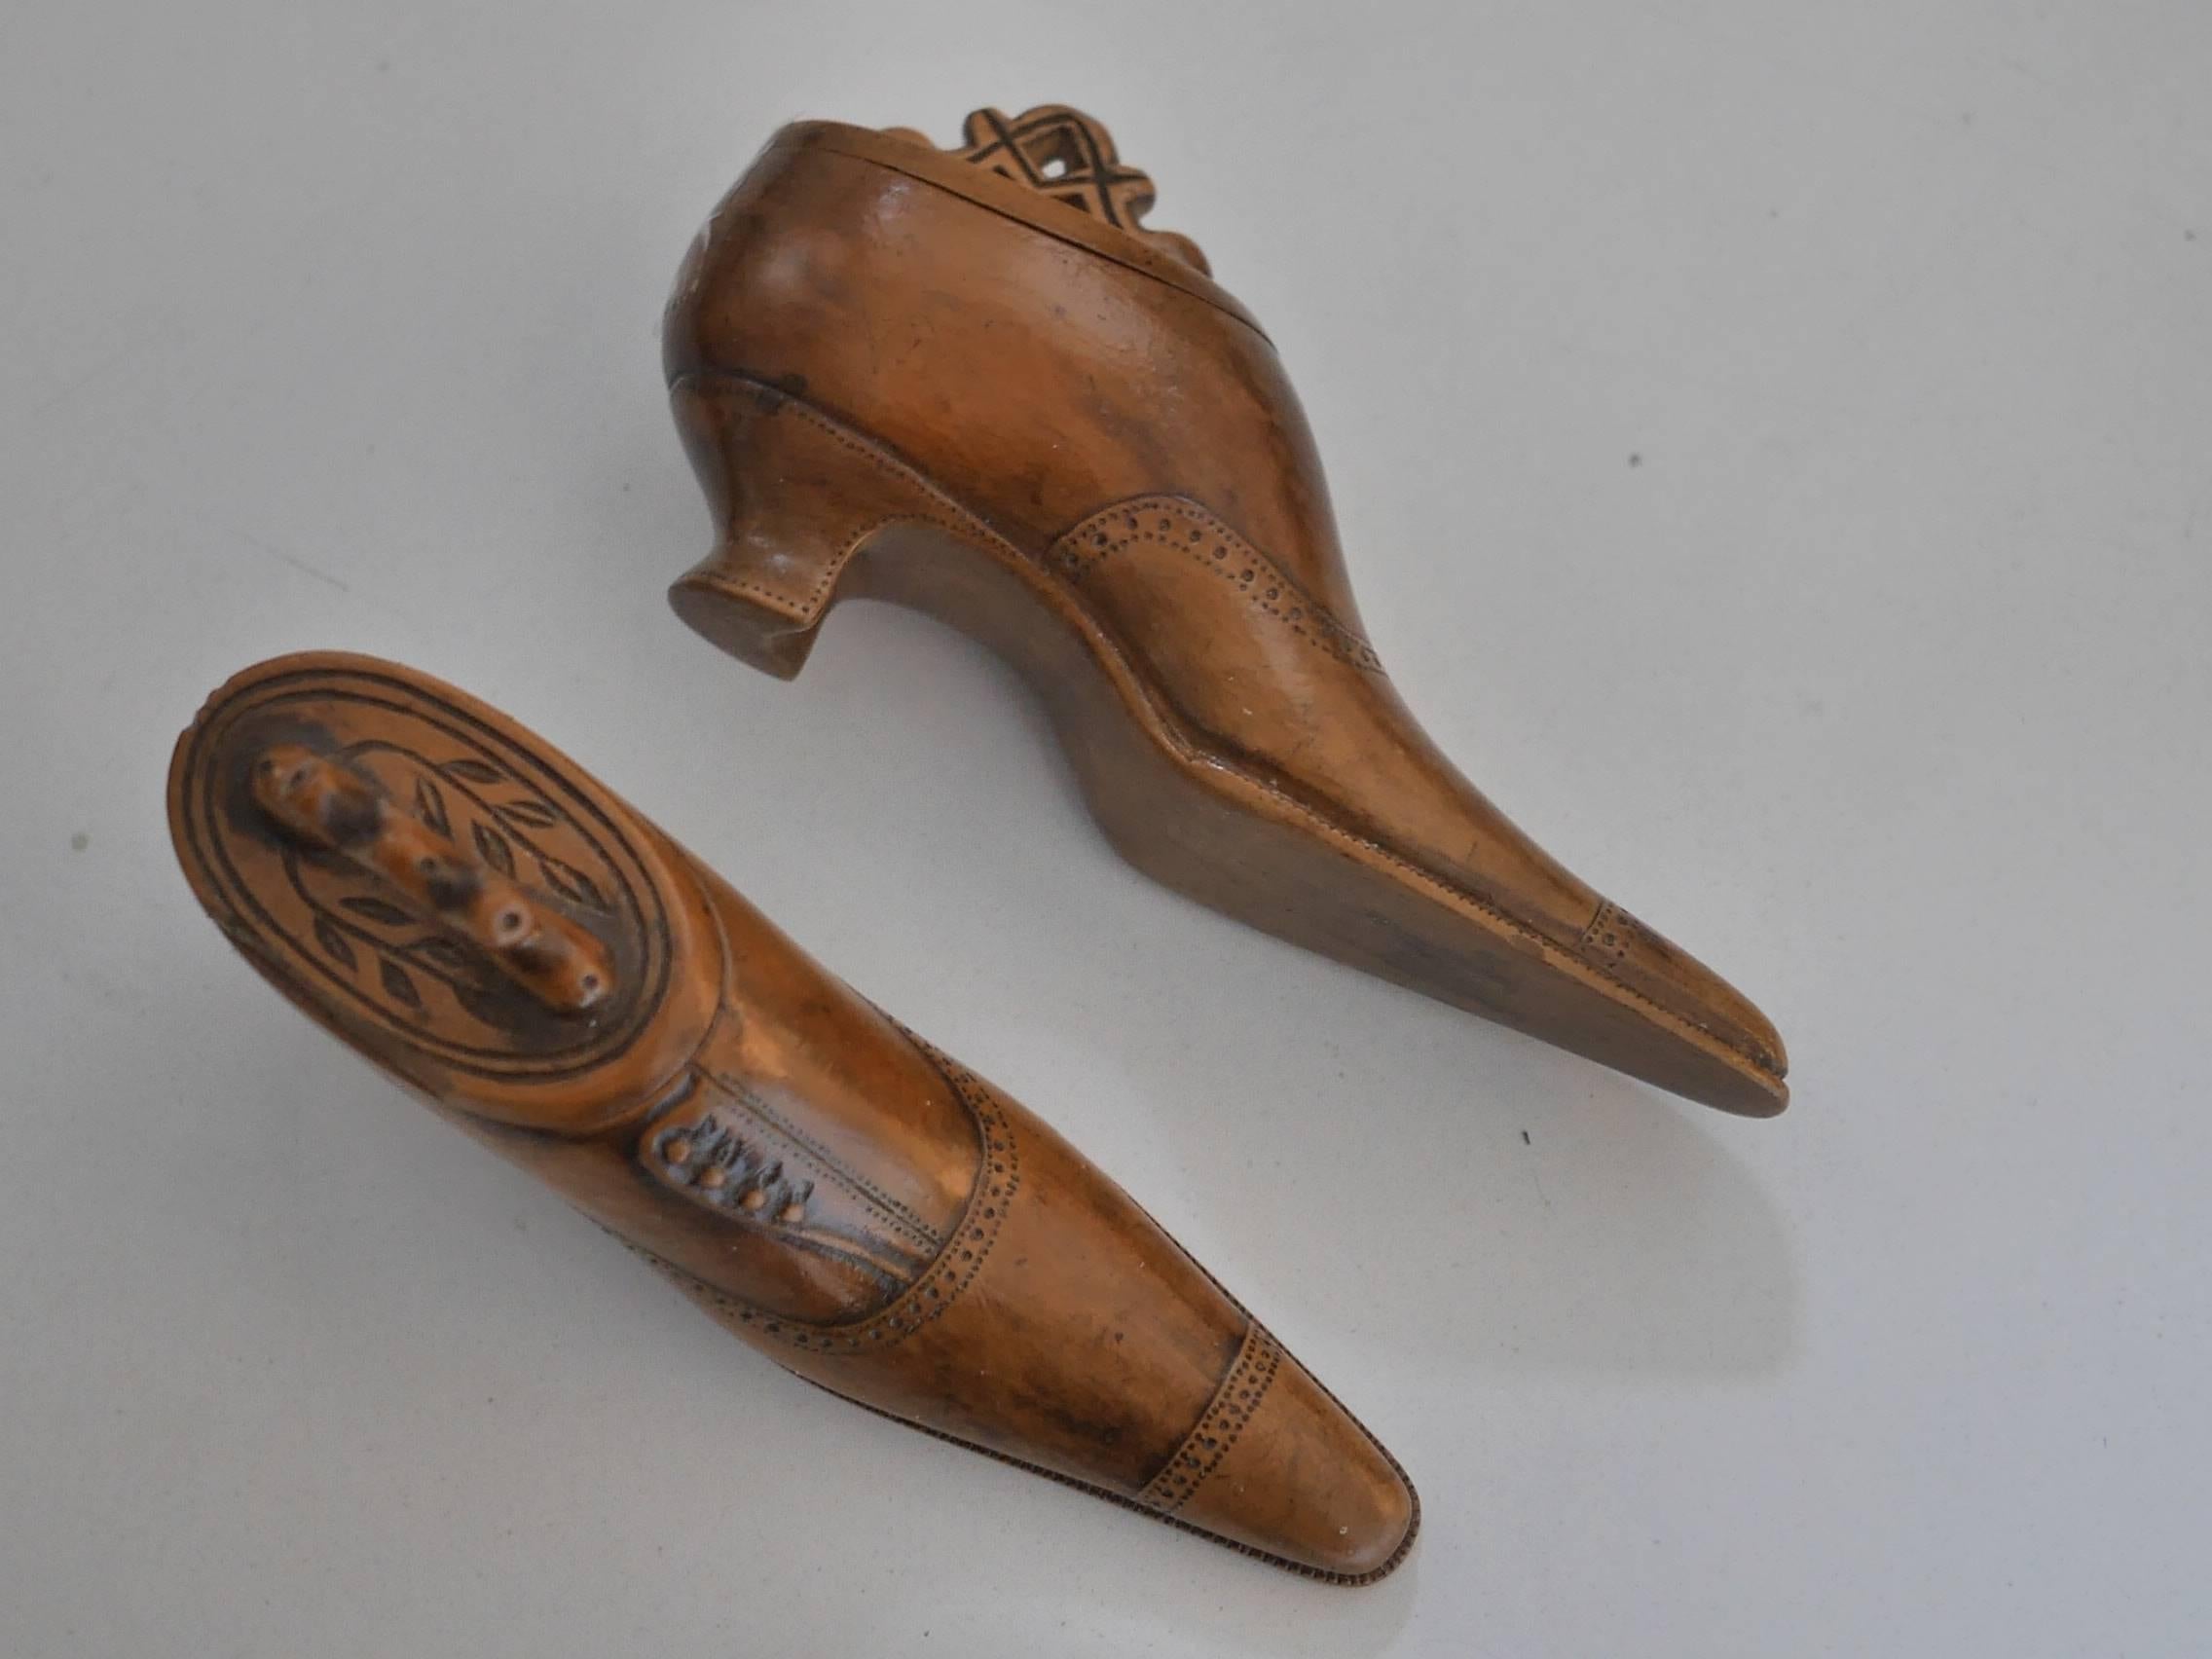 Very peculiar twins snuffboxes featuring a man and a woman shoes, decorated on the lid by their own s initials, A & M. The woman shoe is slightly smaller than the man s one. Inhaling snuff, or snuffing, as it is also called, was first witnessed by a